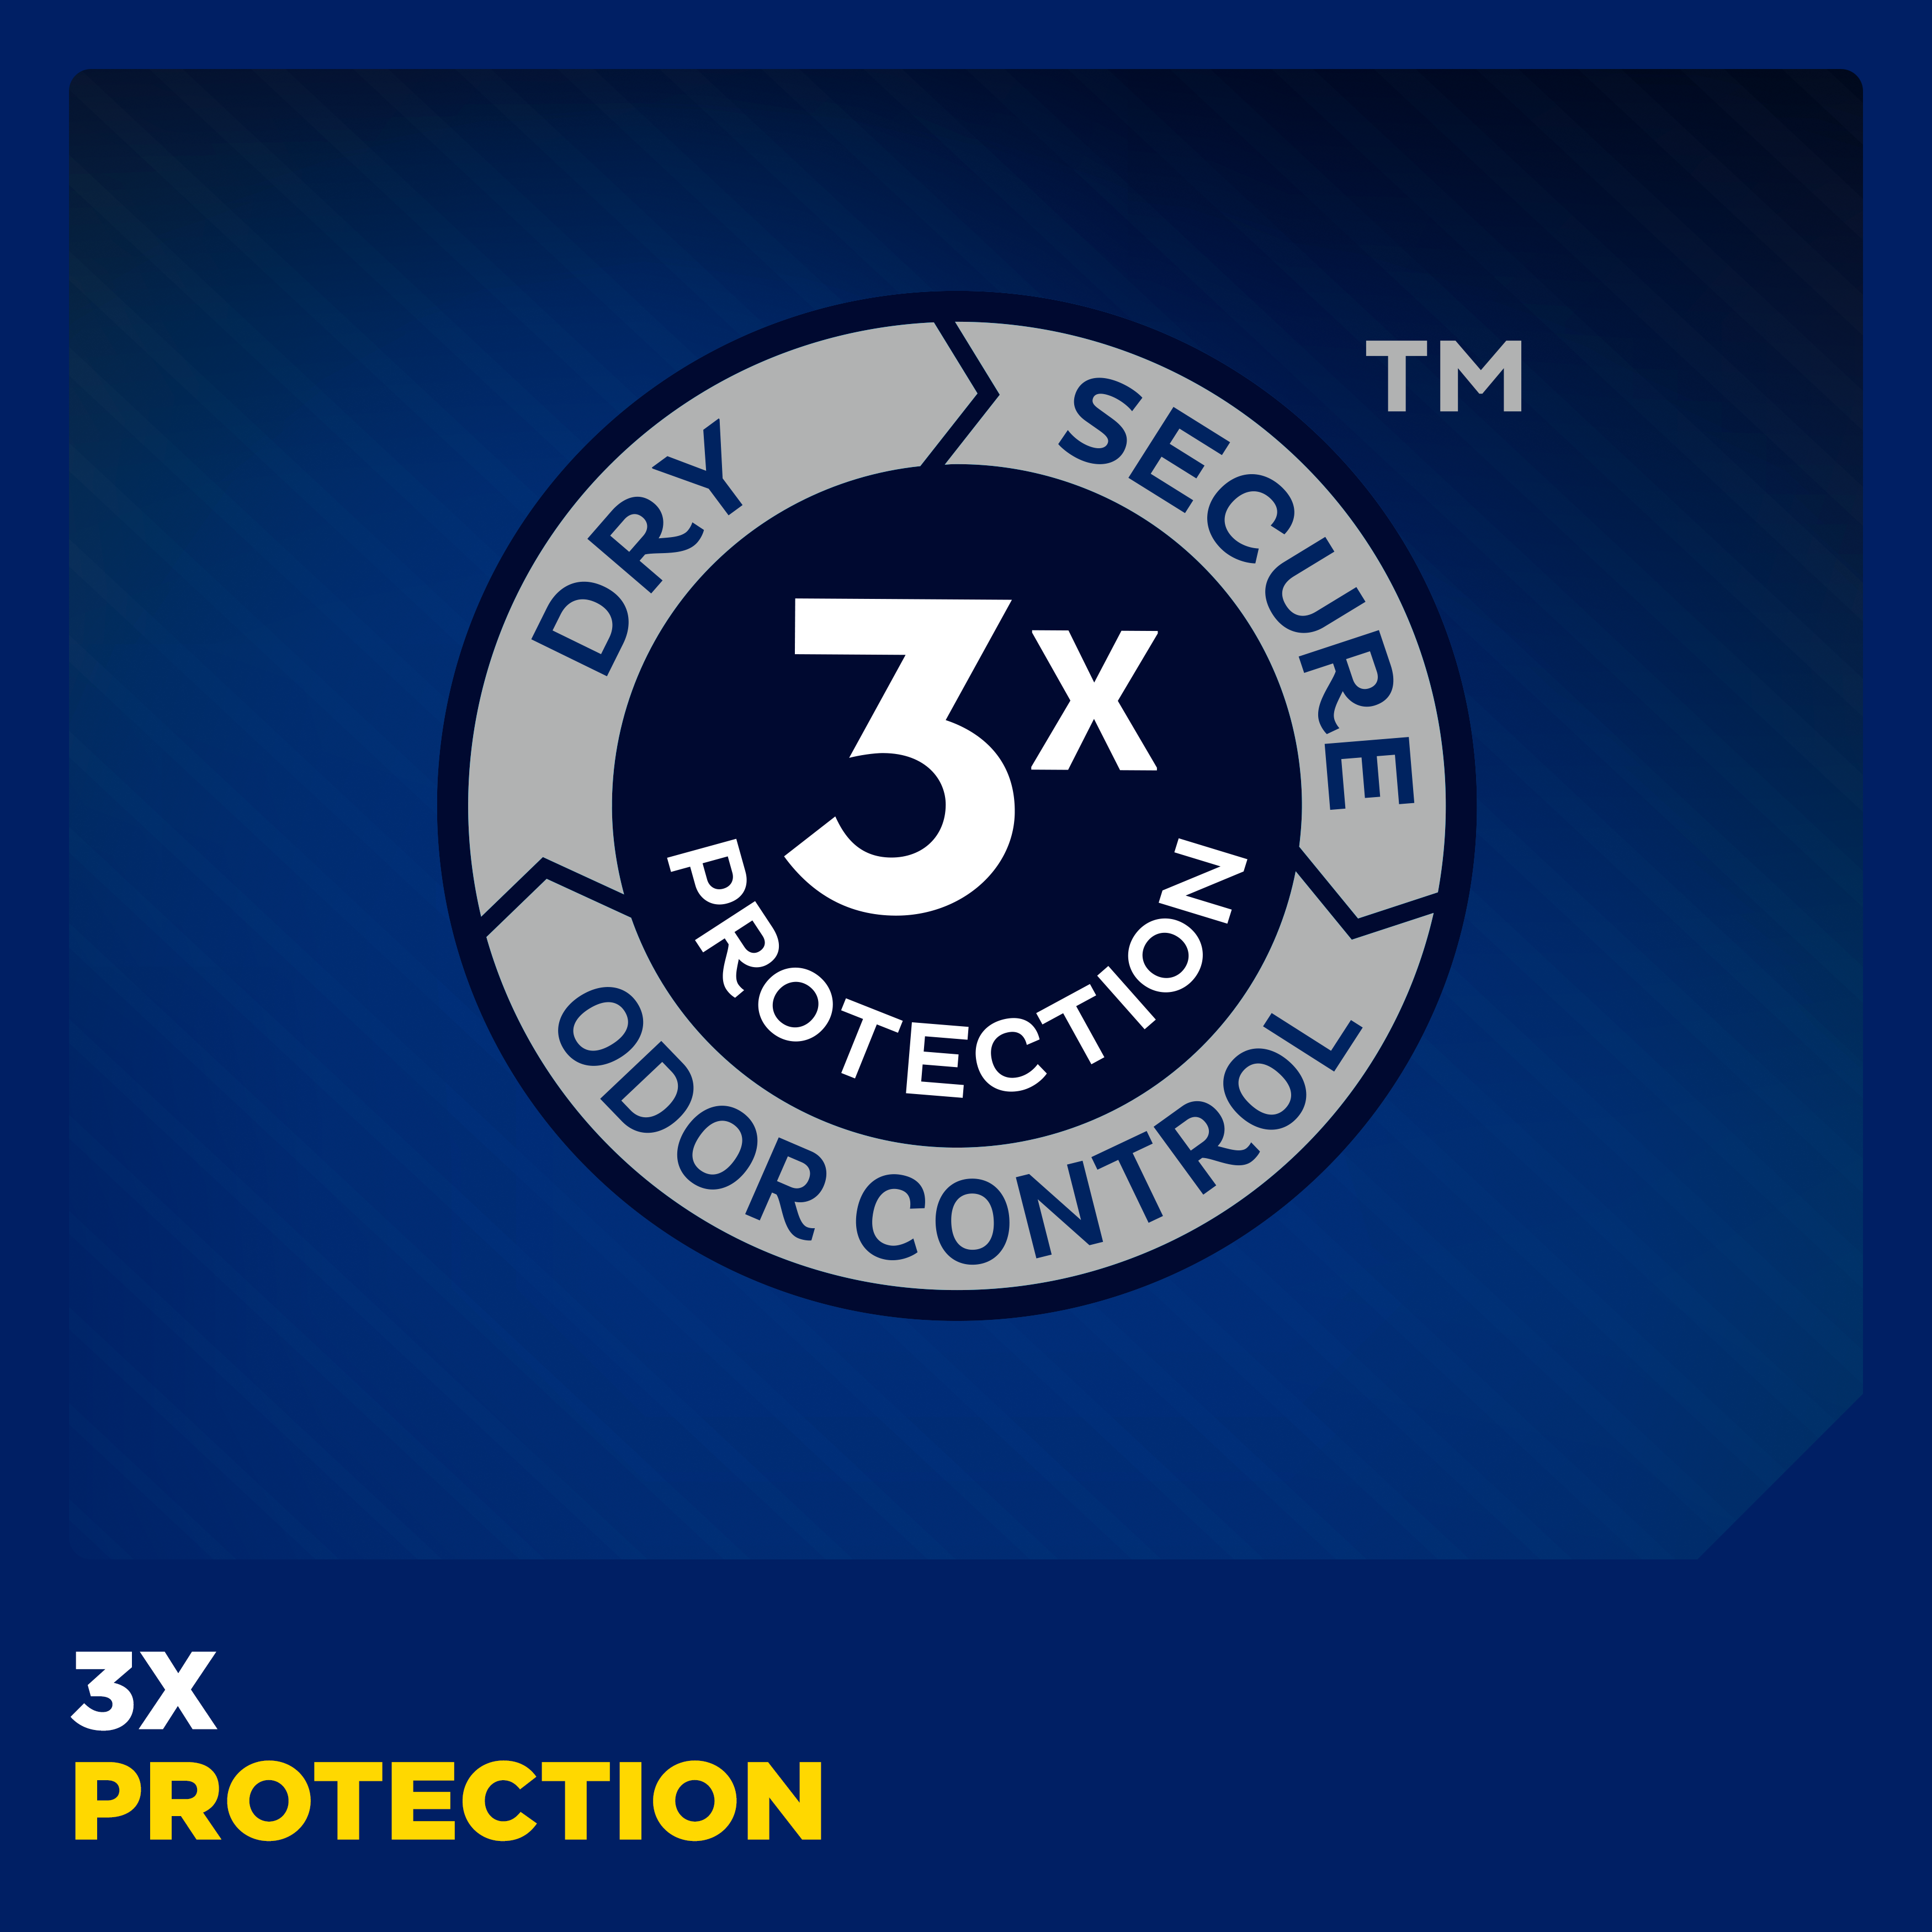 An icon showing 3x protection: dry, secure and odor control